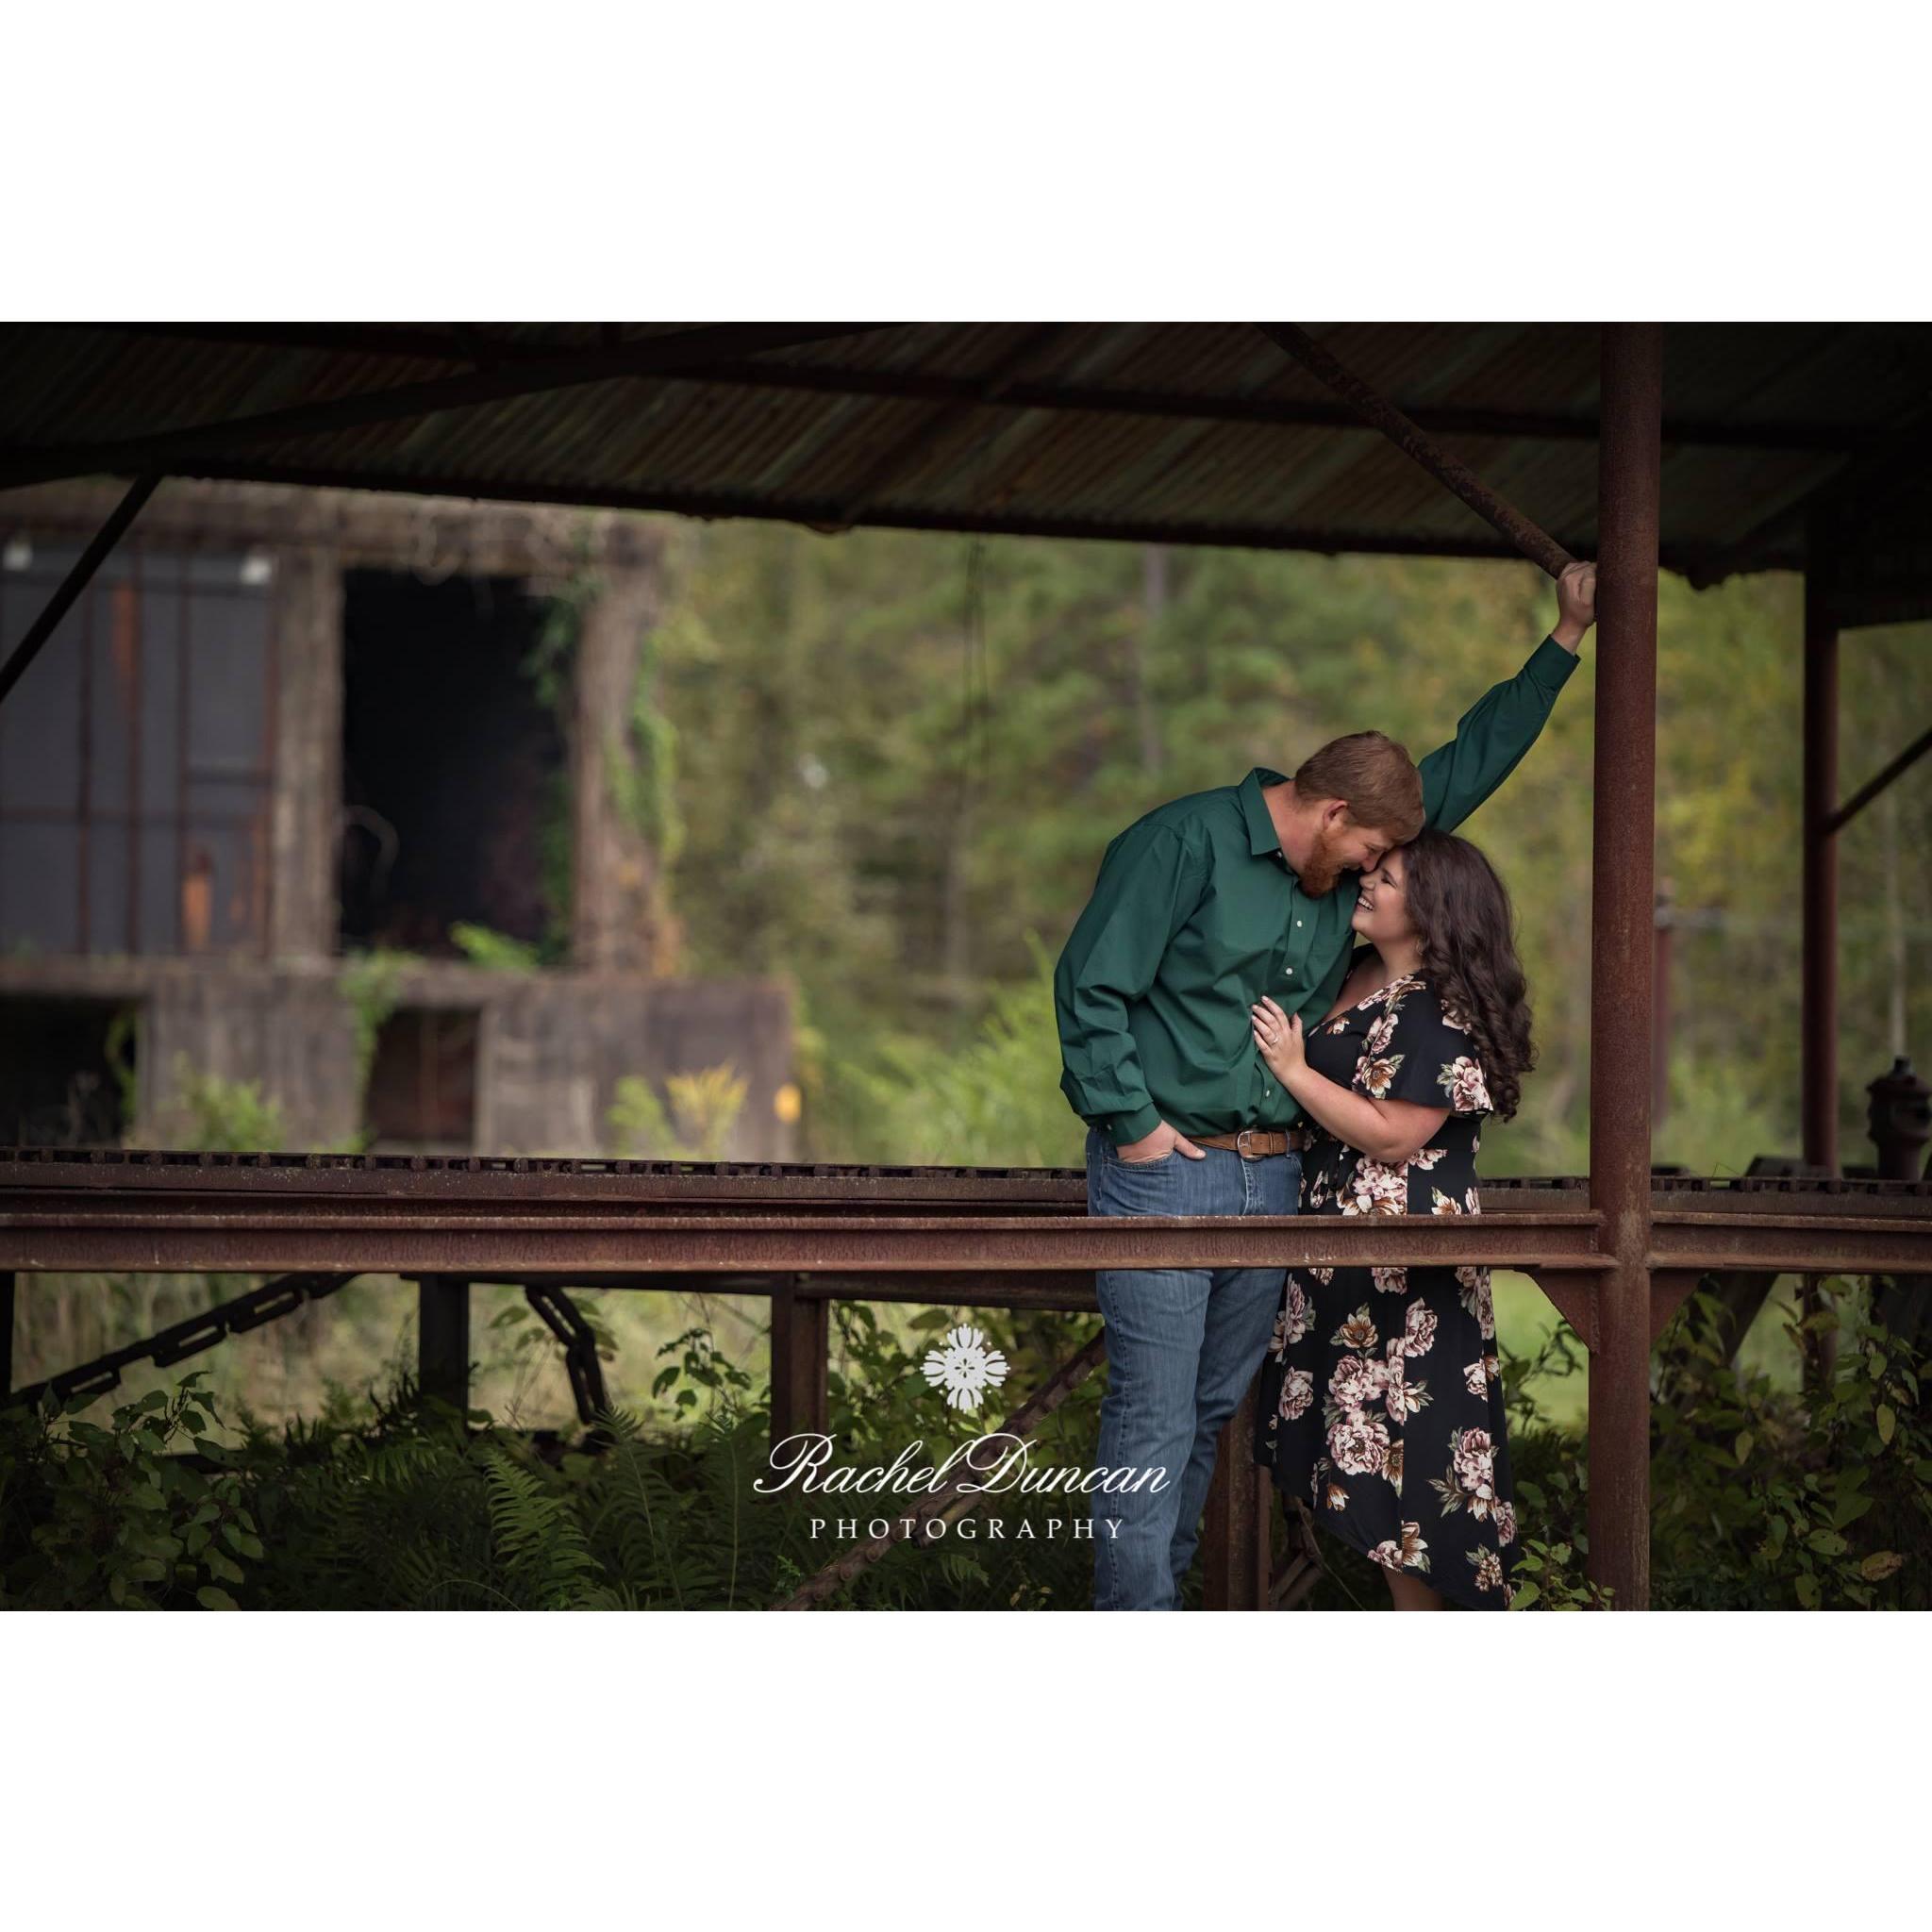 Can't say enough wonderful things about Rachel Duncan Photography!